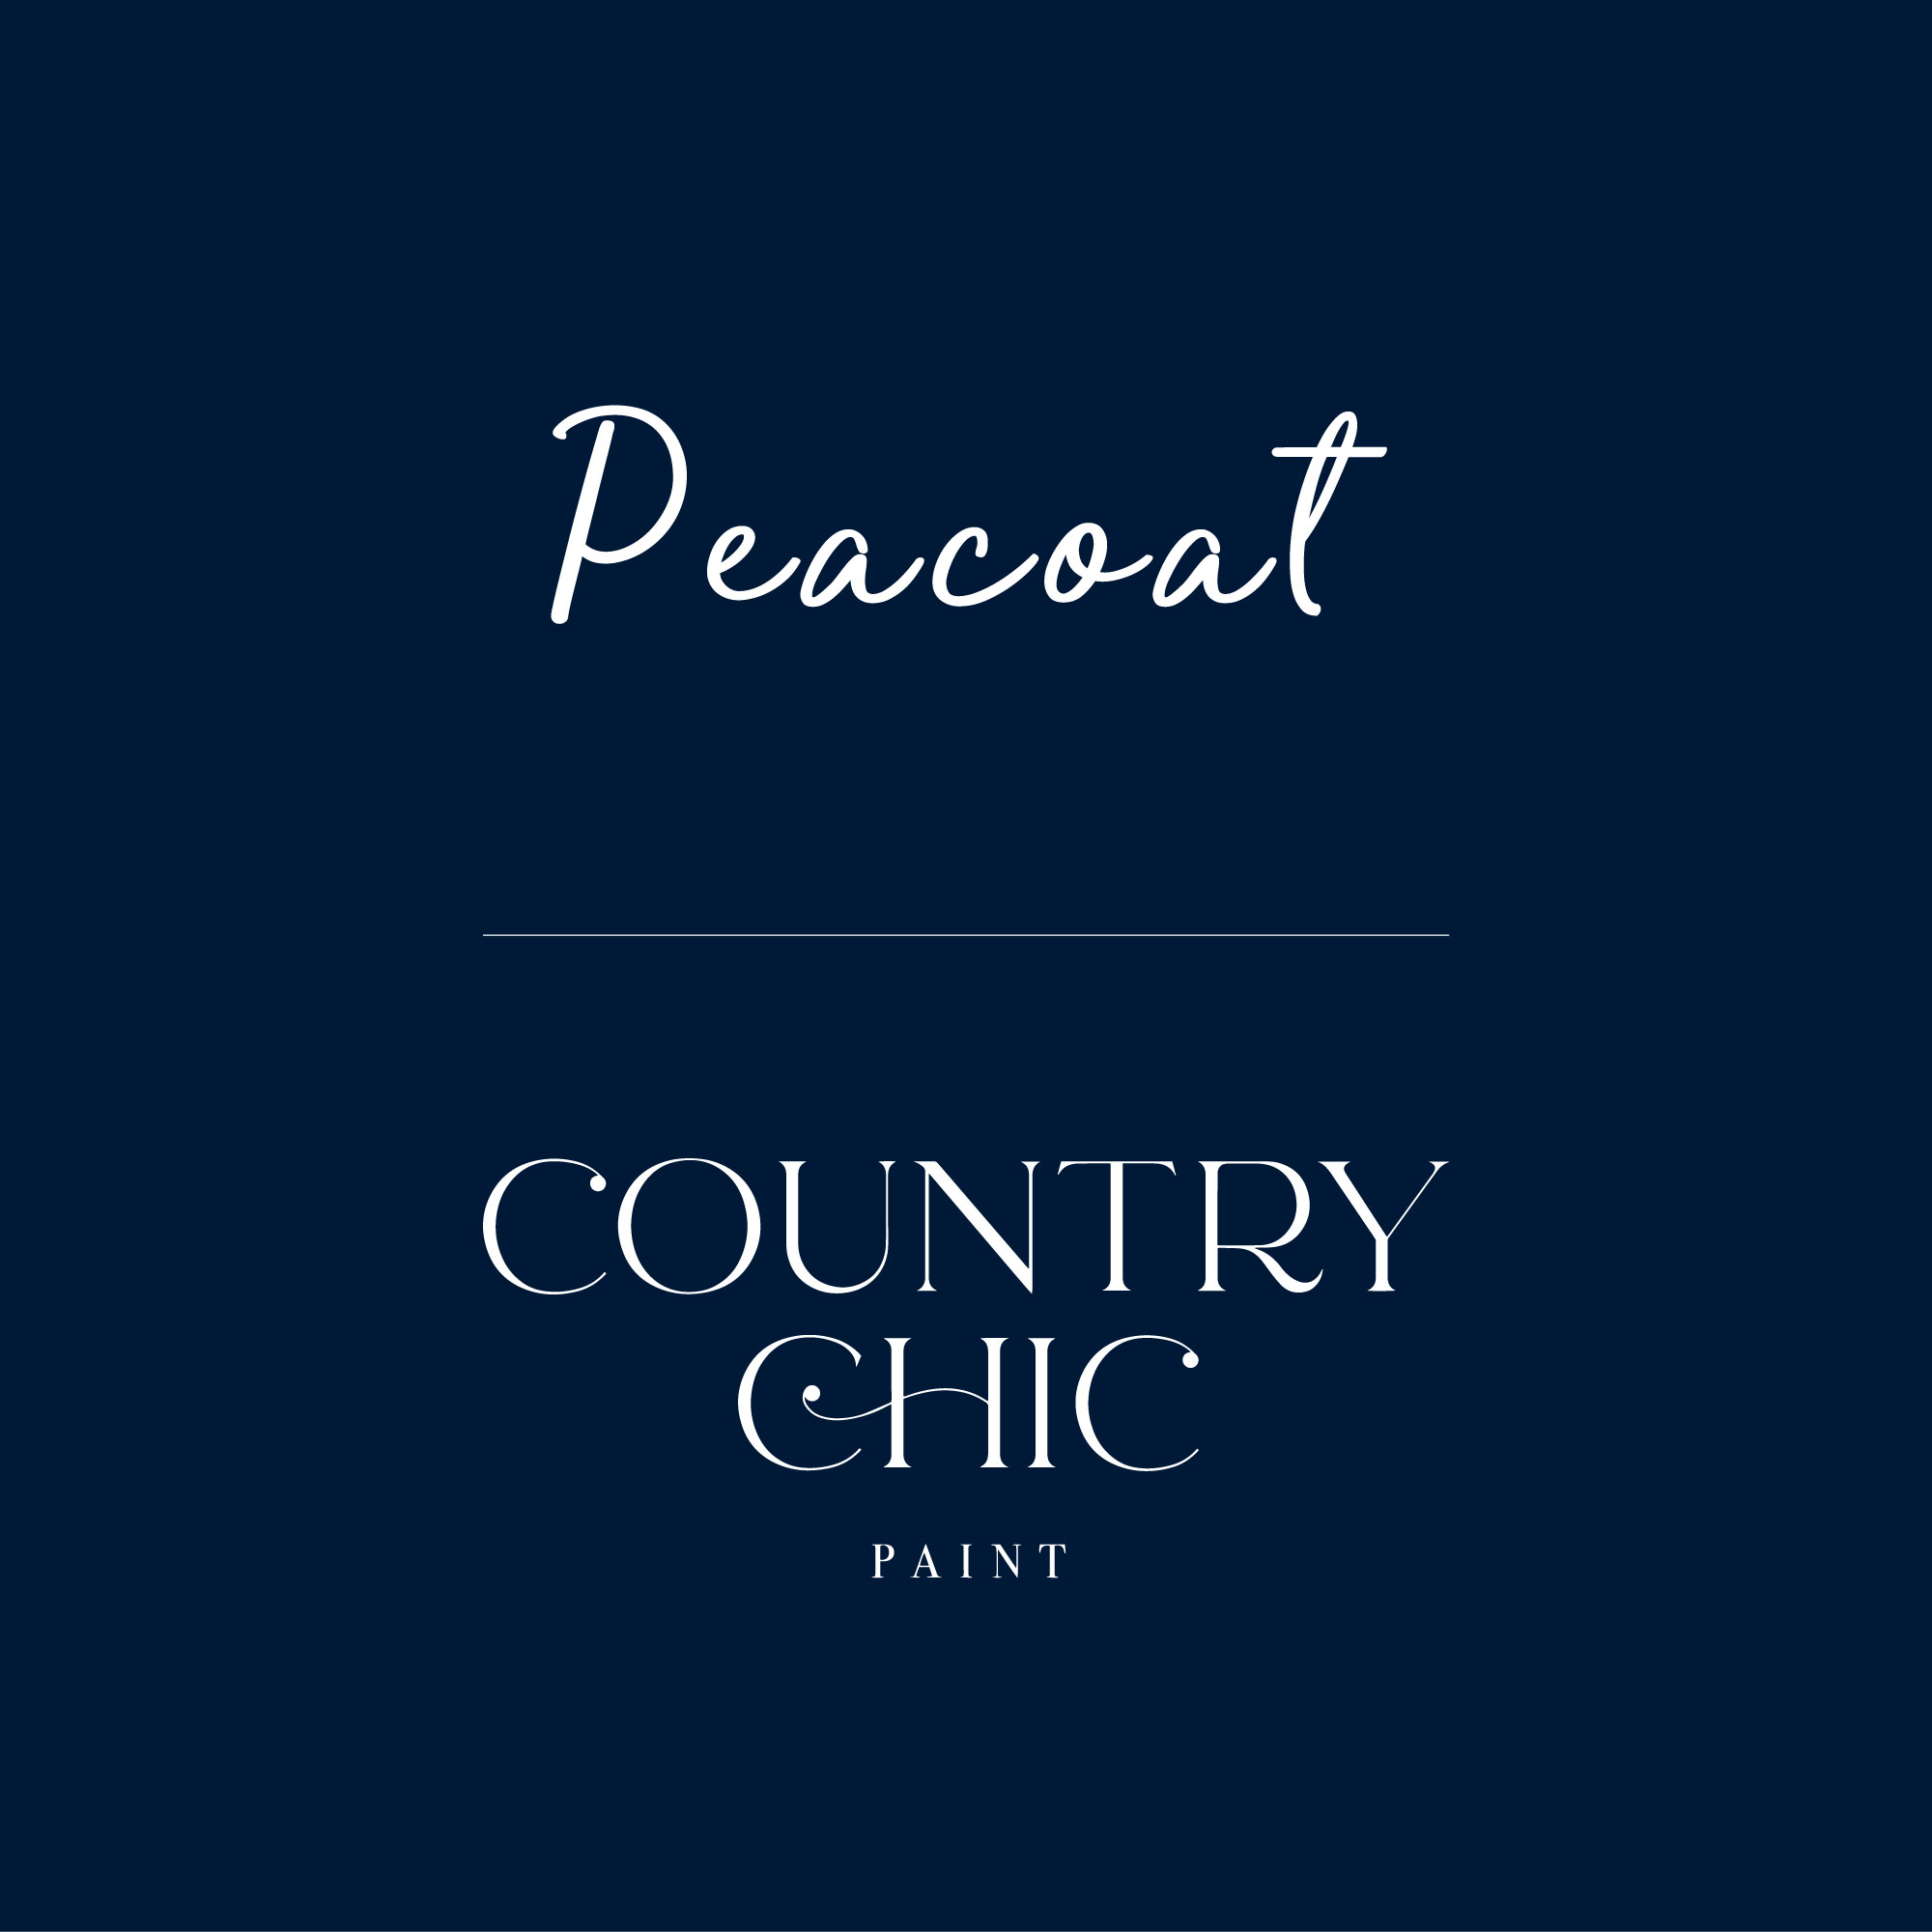 Country Chic Paint Peacoat